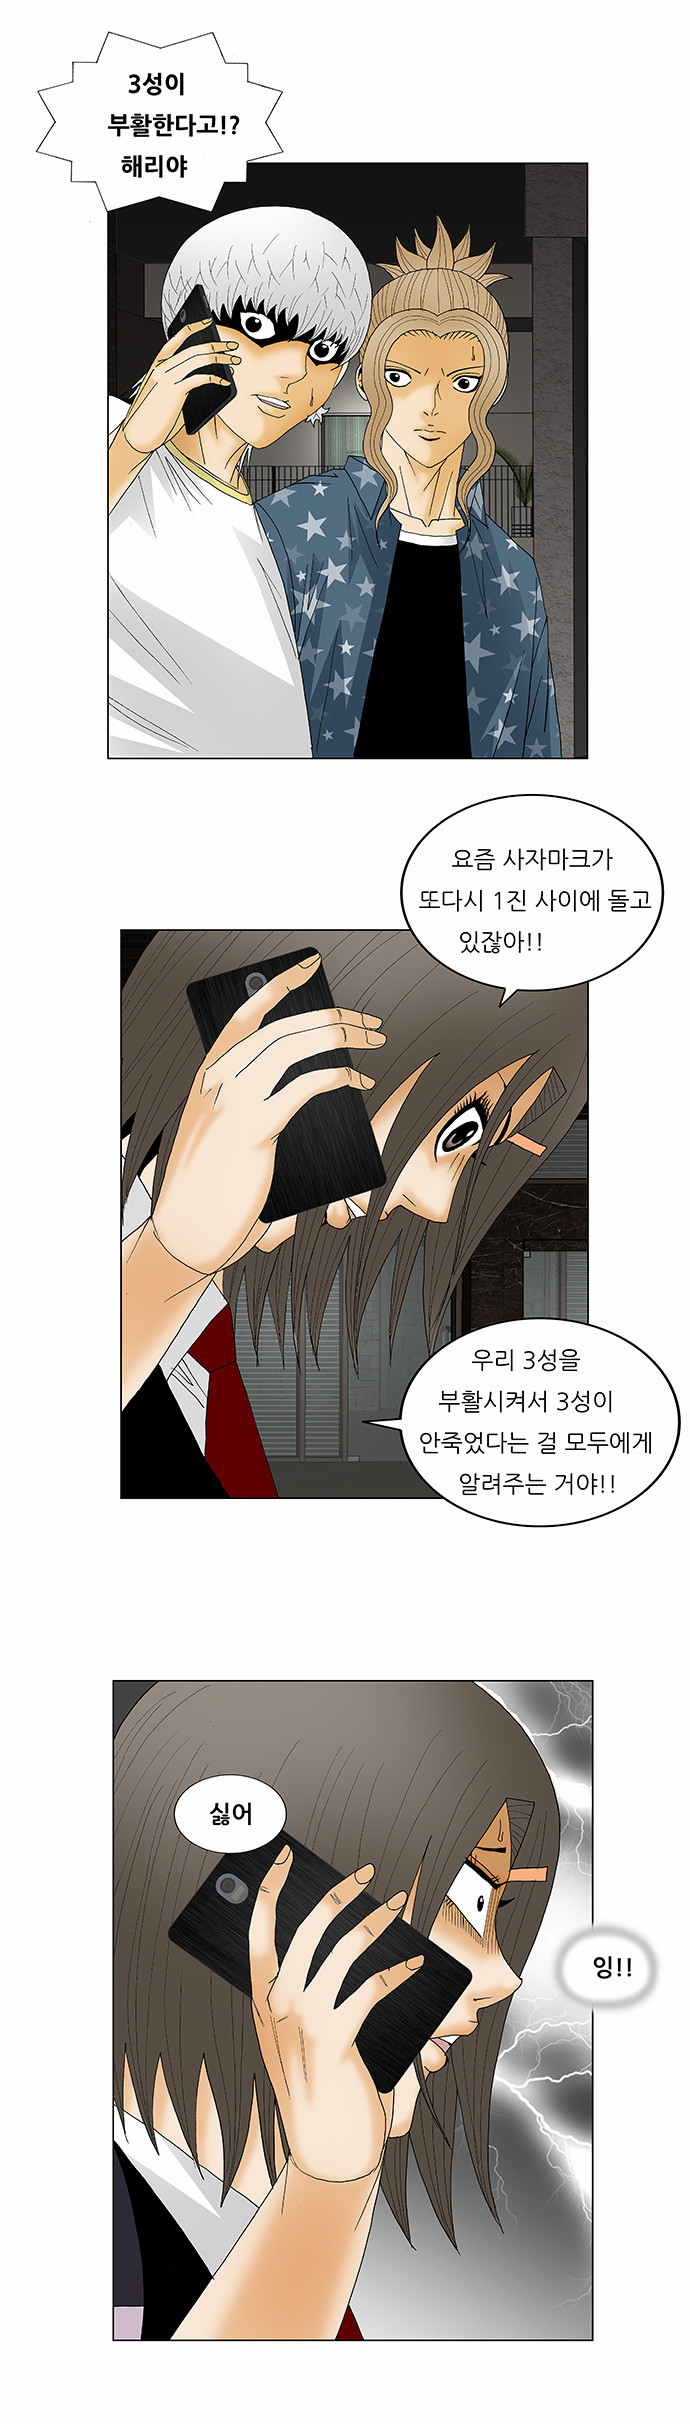 Ultimate Legend - Kang Hae Hyo - Chapter 123 - Page 4